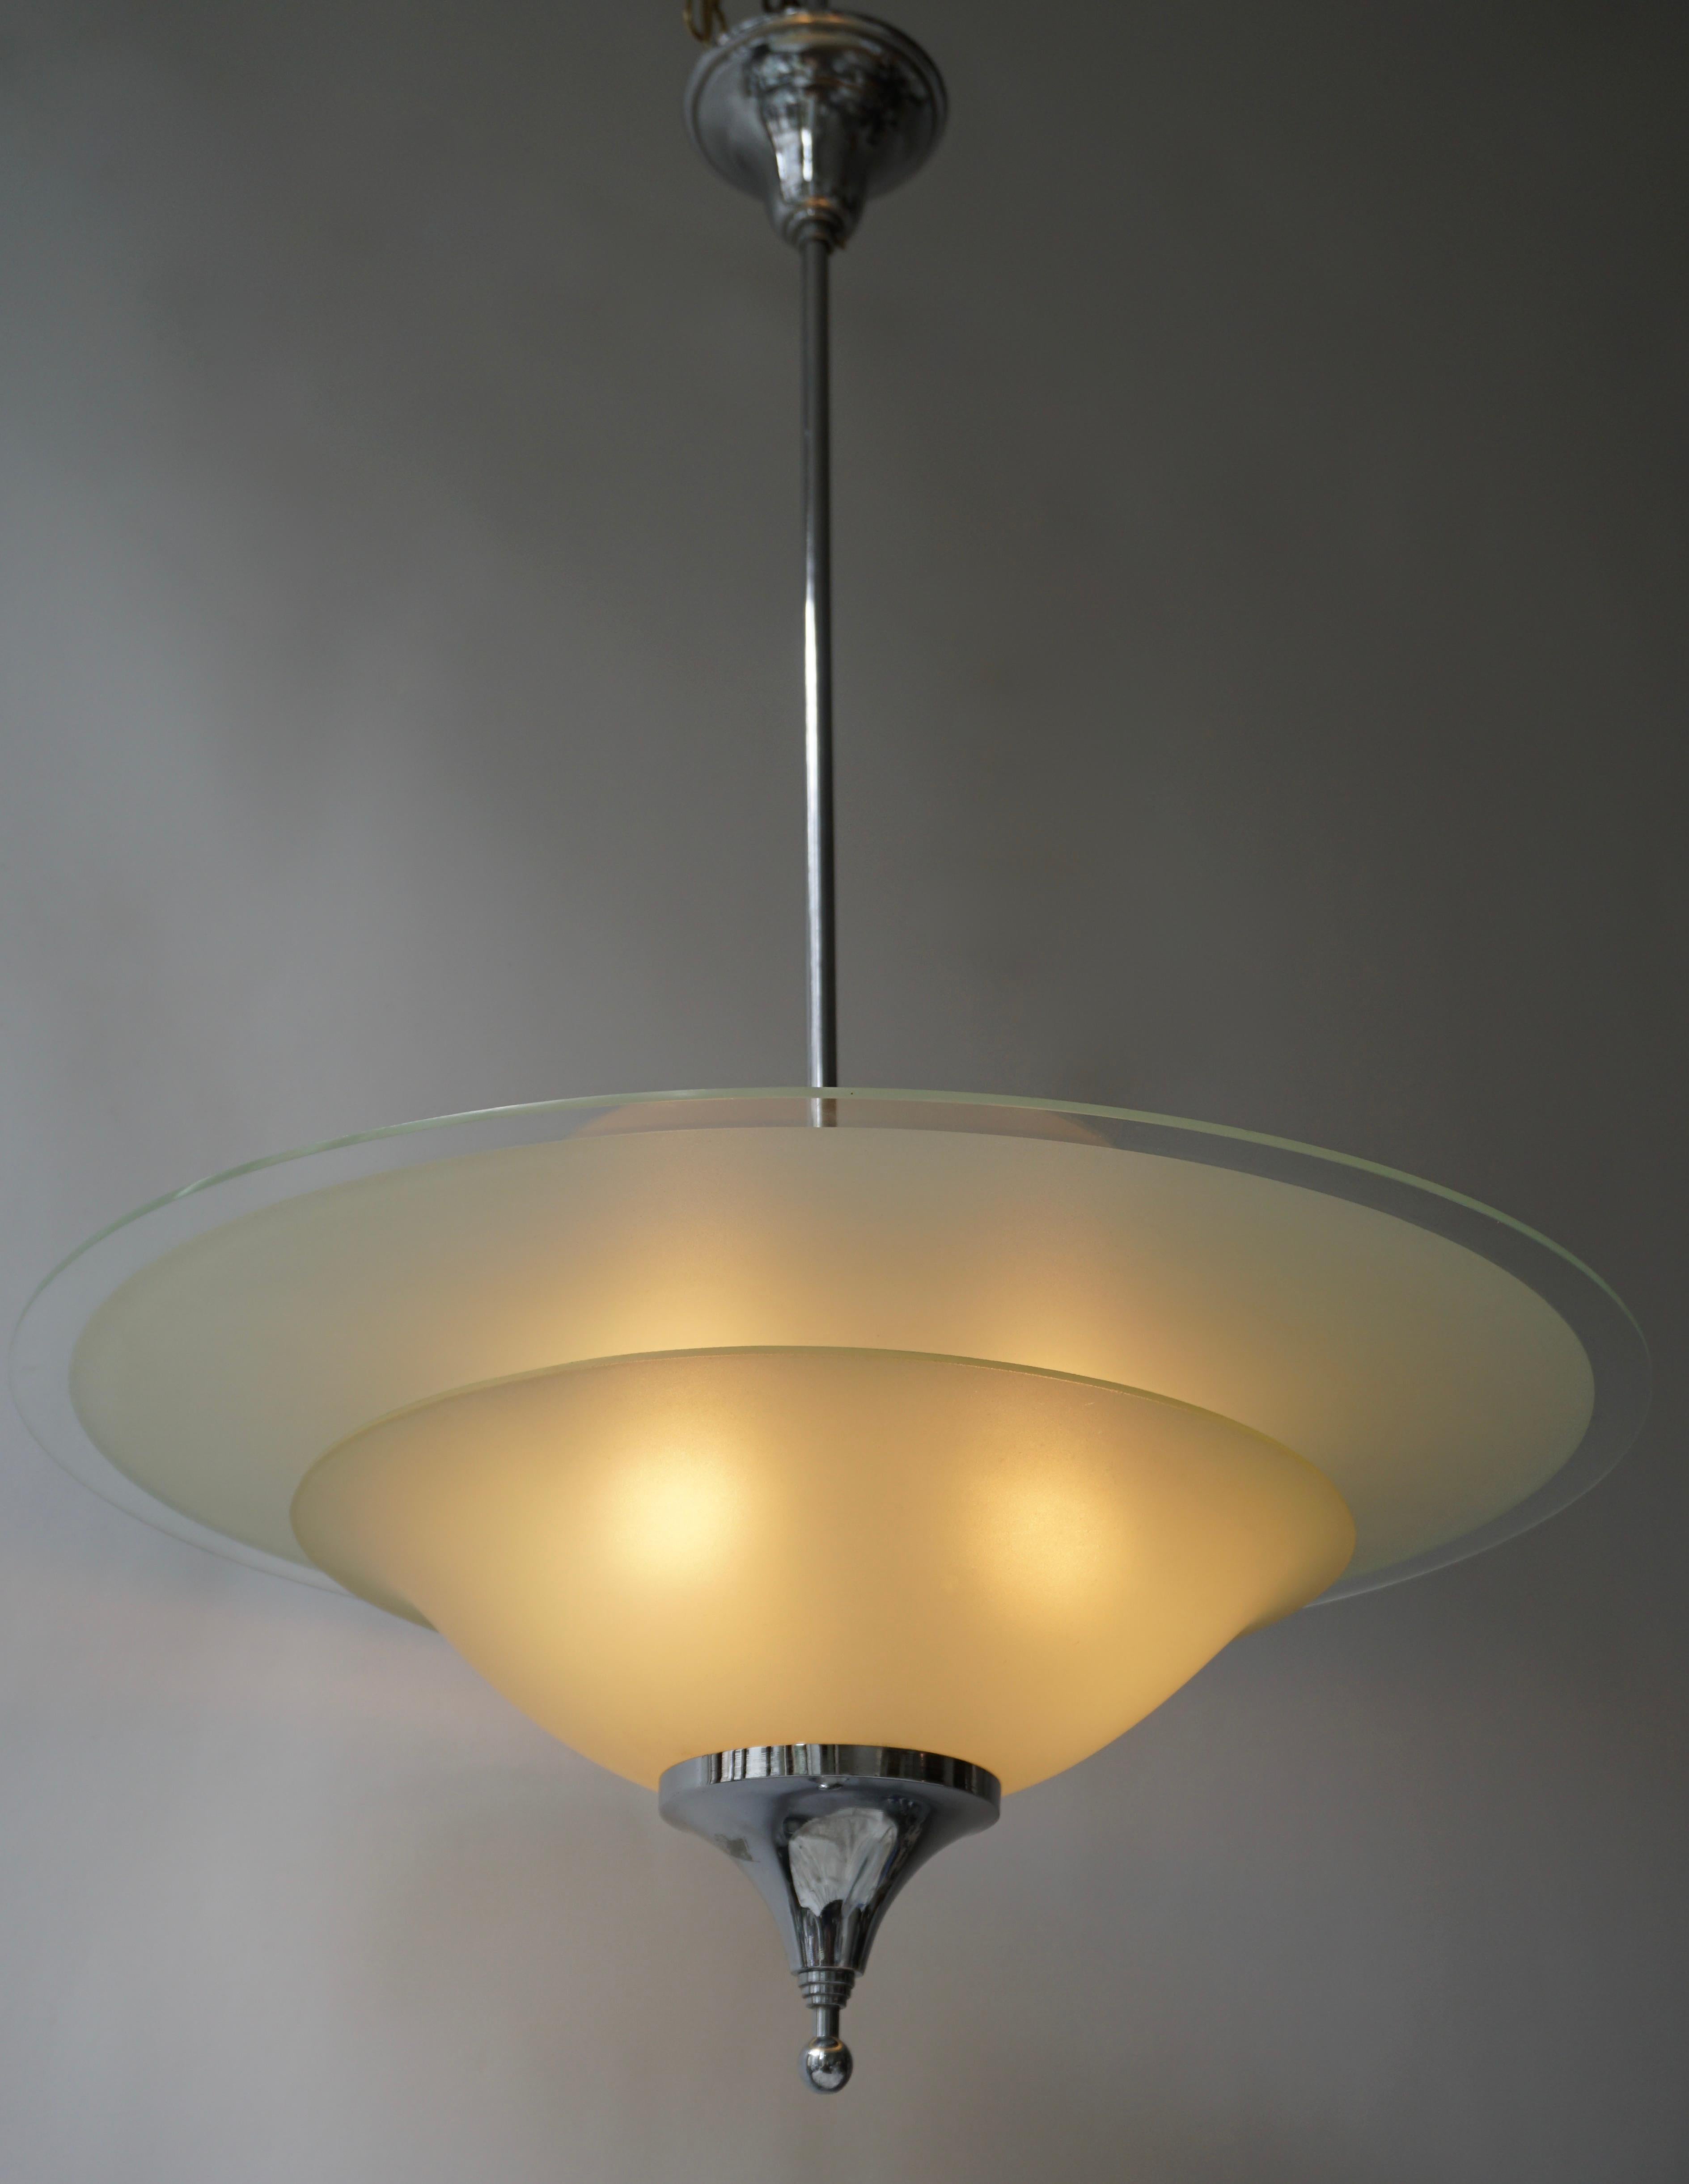 Wonderful and decorative and pendant light in chrome and frosted glass.Designed and made in Belgium from circa 1930s. 
The chandelier is fully working and in very good vintage condition.

The light requires three single E27 screw fit lightbulbs